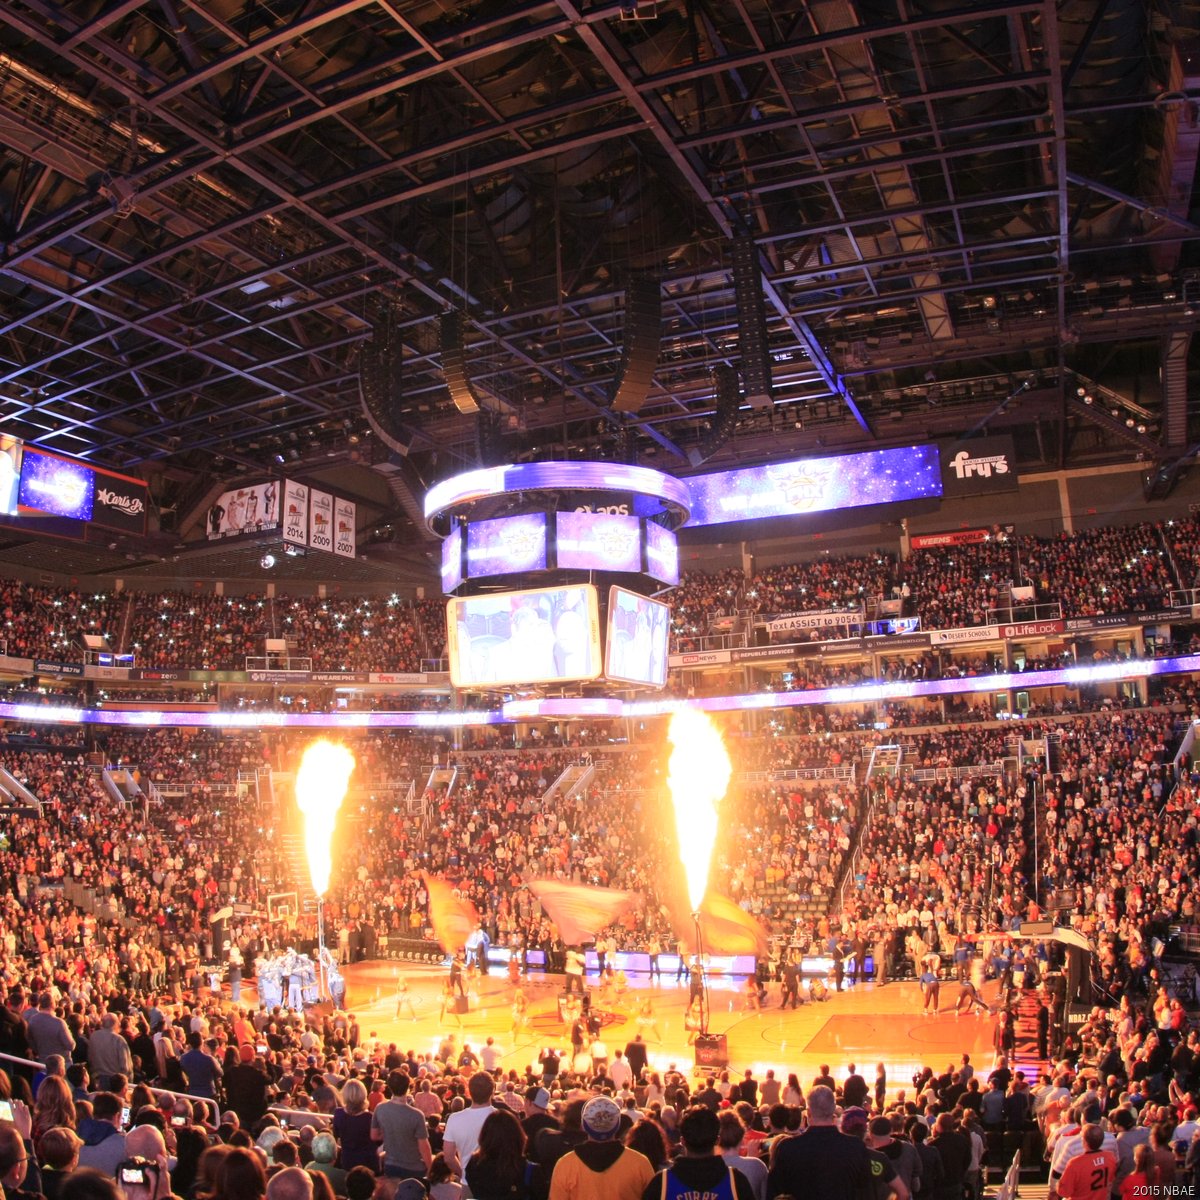 Phoenix Suns not allowing fans at games to start the season